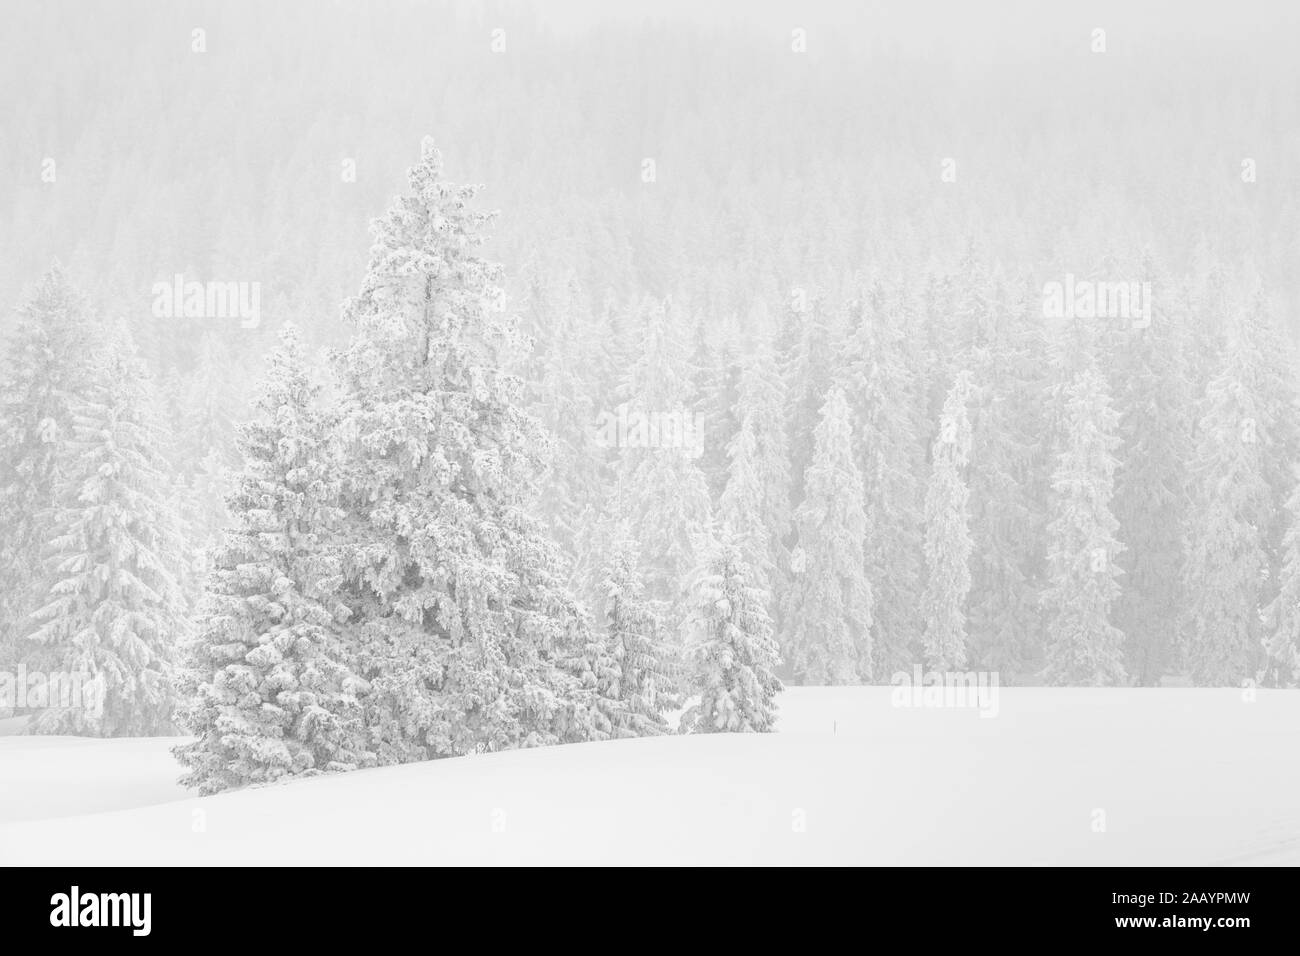 High-key winter landscape with fir trees in the foothills of Switzerland Stock Photo